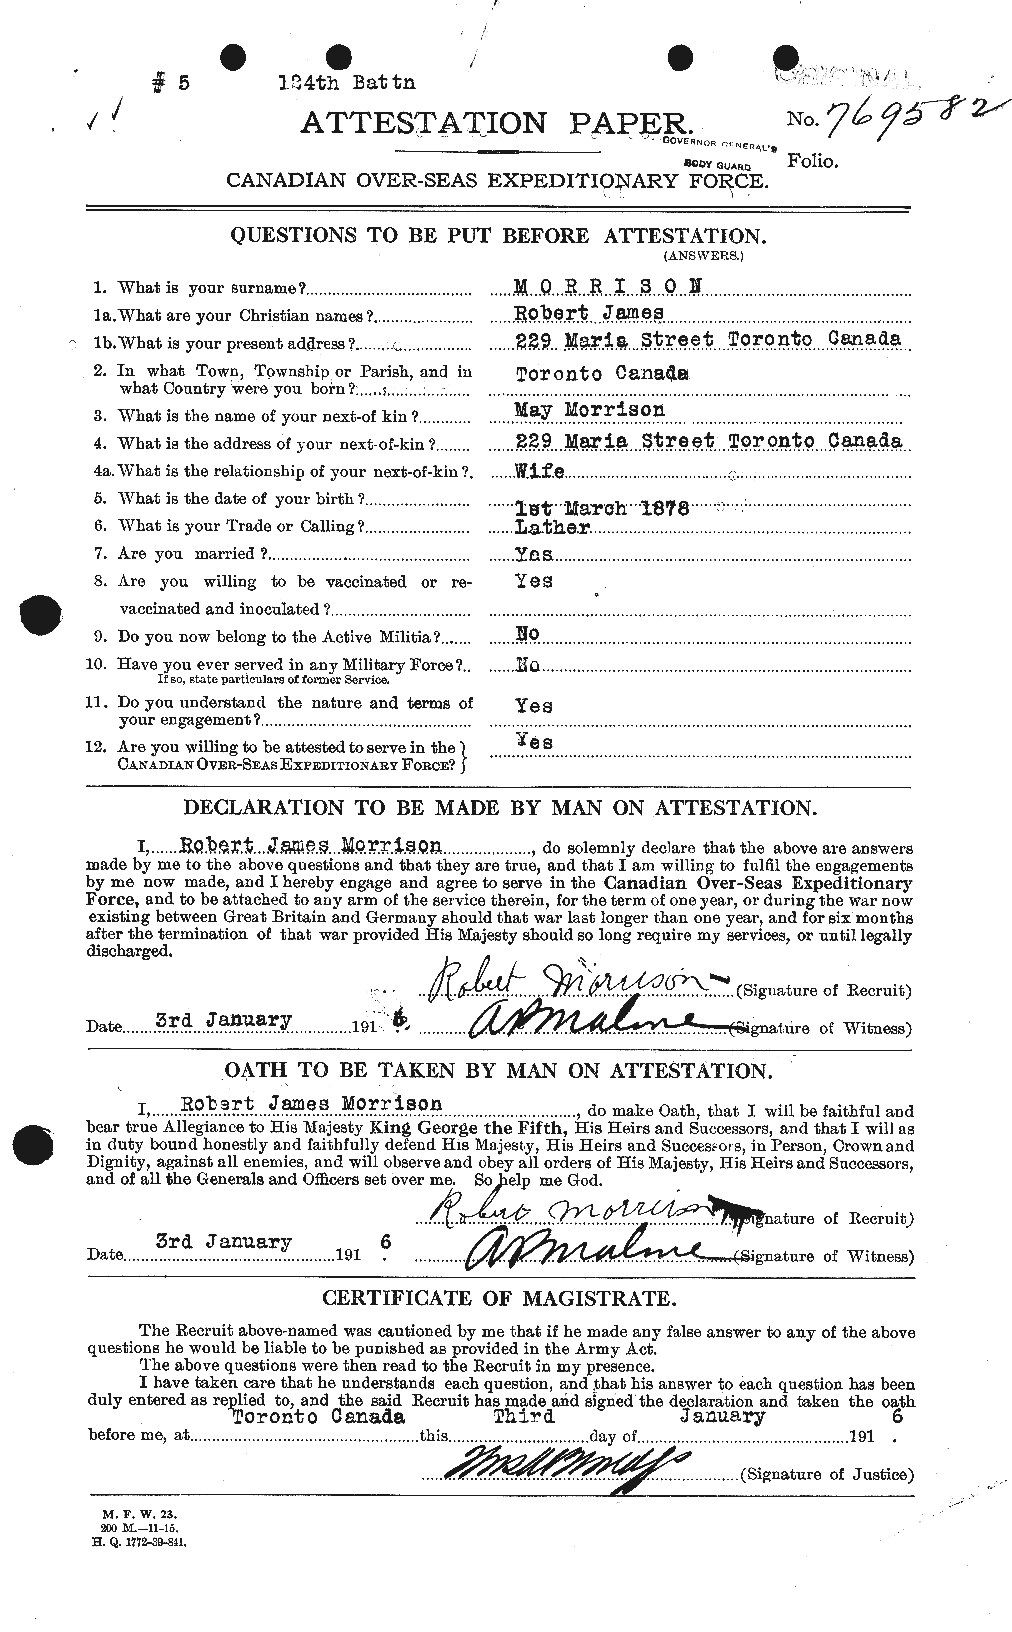 Personnel Records of the First World War - CEF 509113a